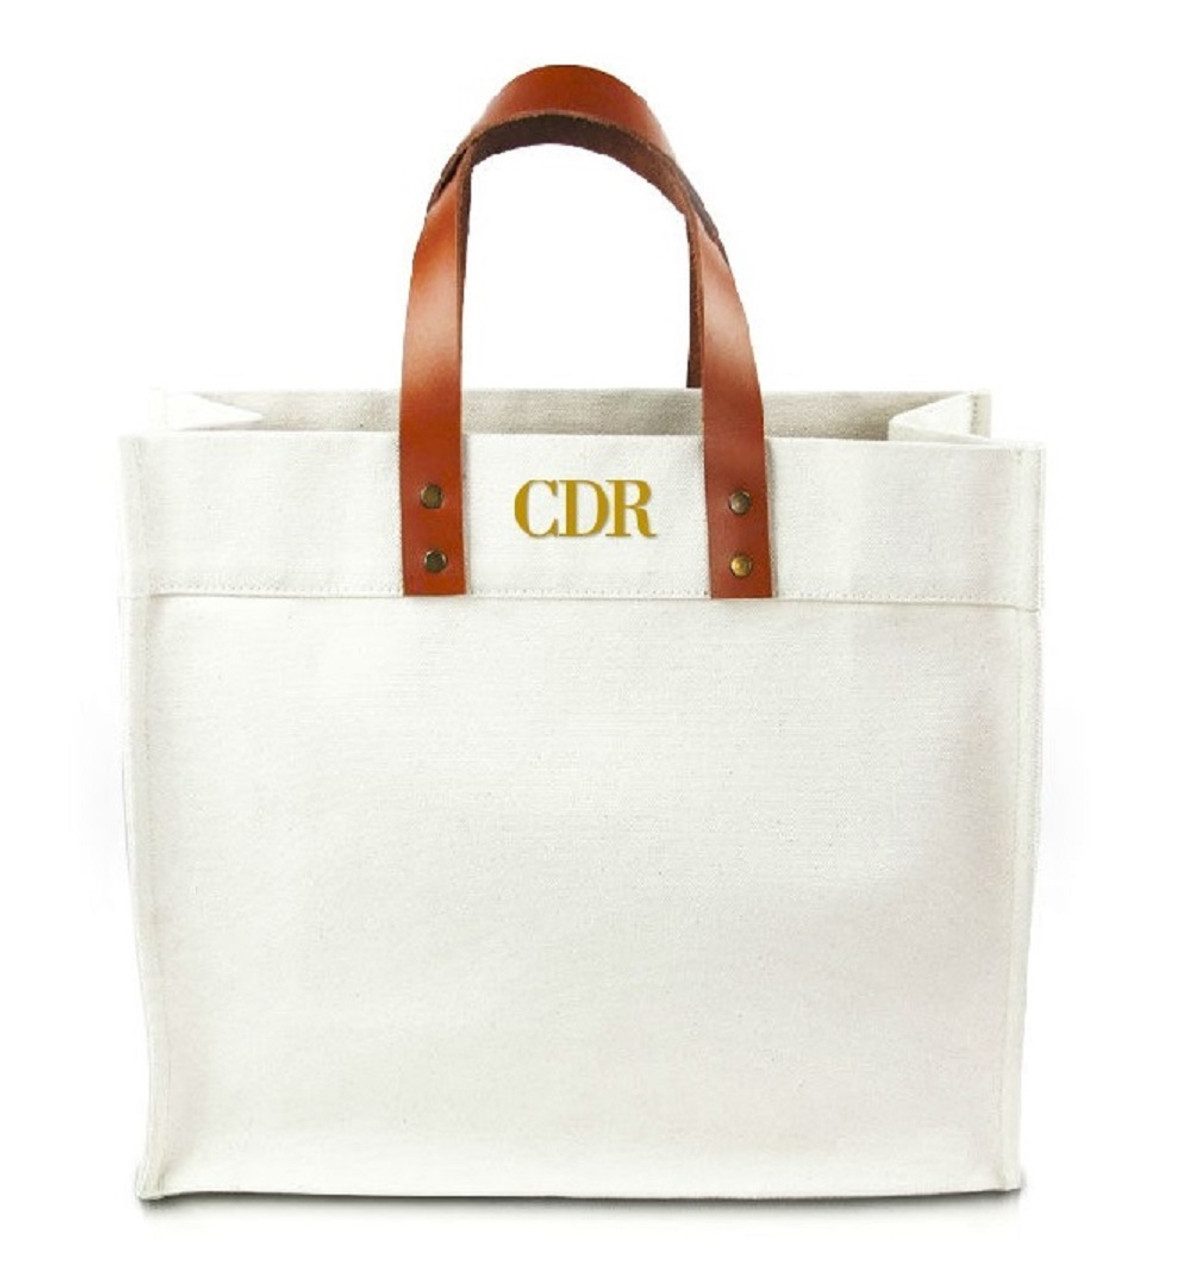 Fulham Personalized Monogram Canvas Tote Bag w/ Leather Straps